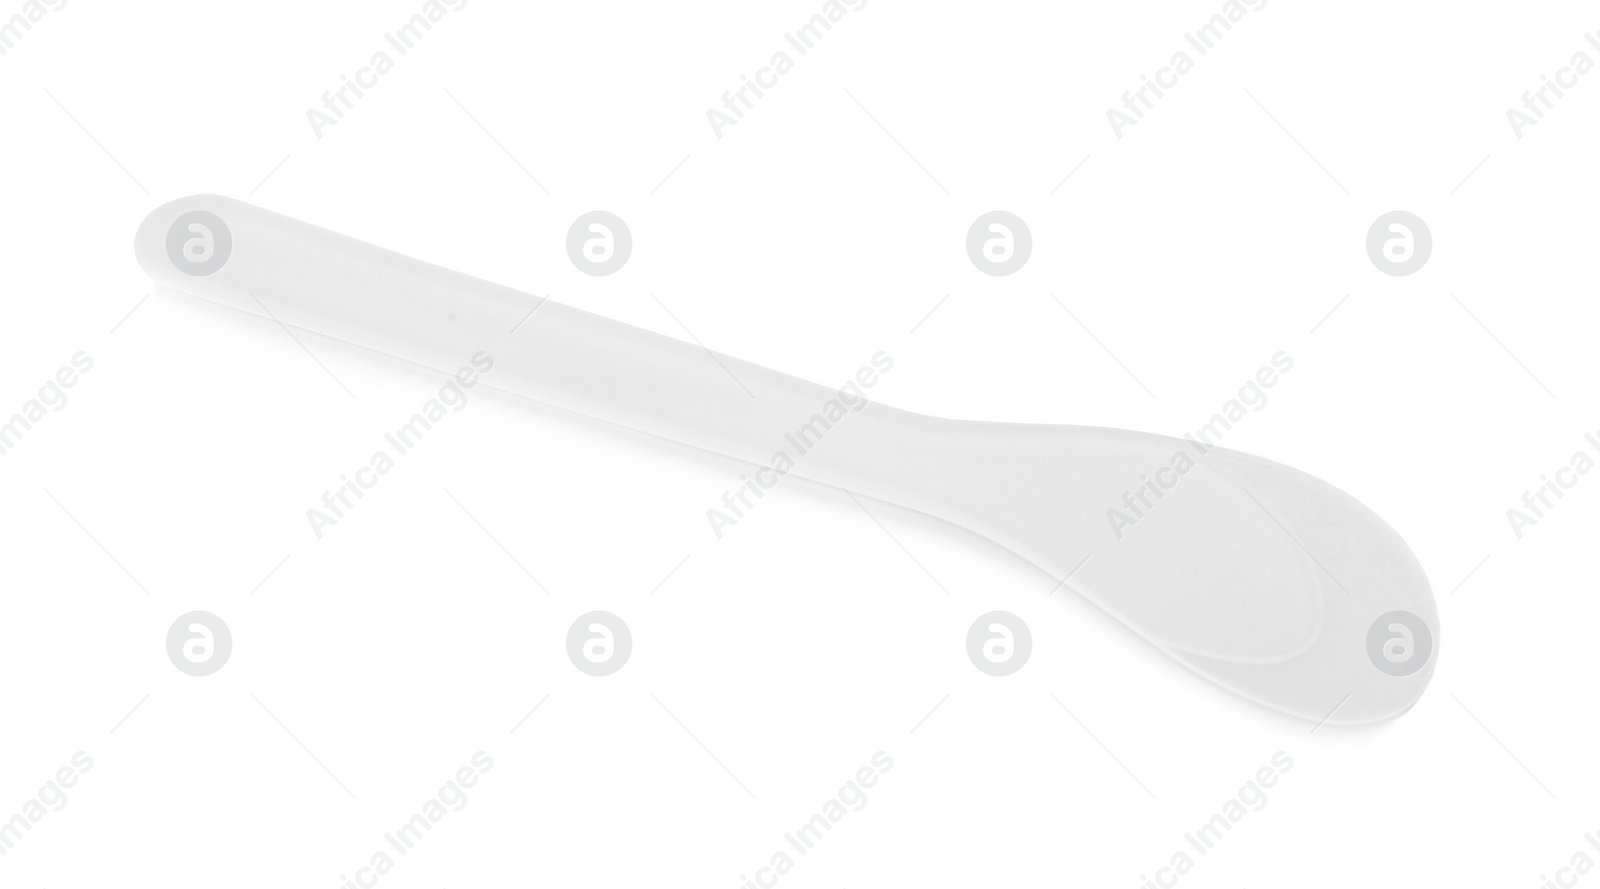 Photo of Plastic spatula for depilatory wax isolated on white